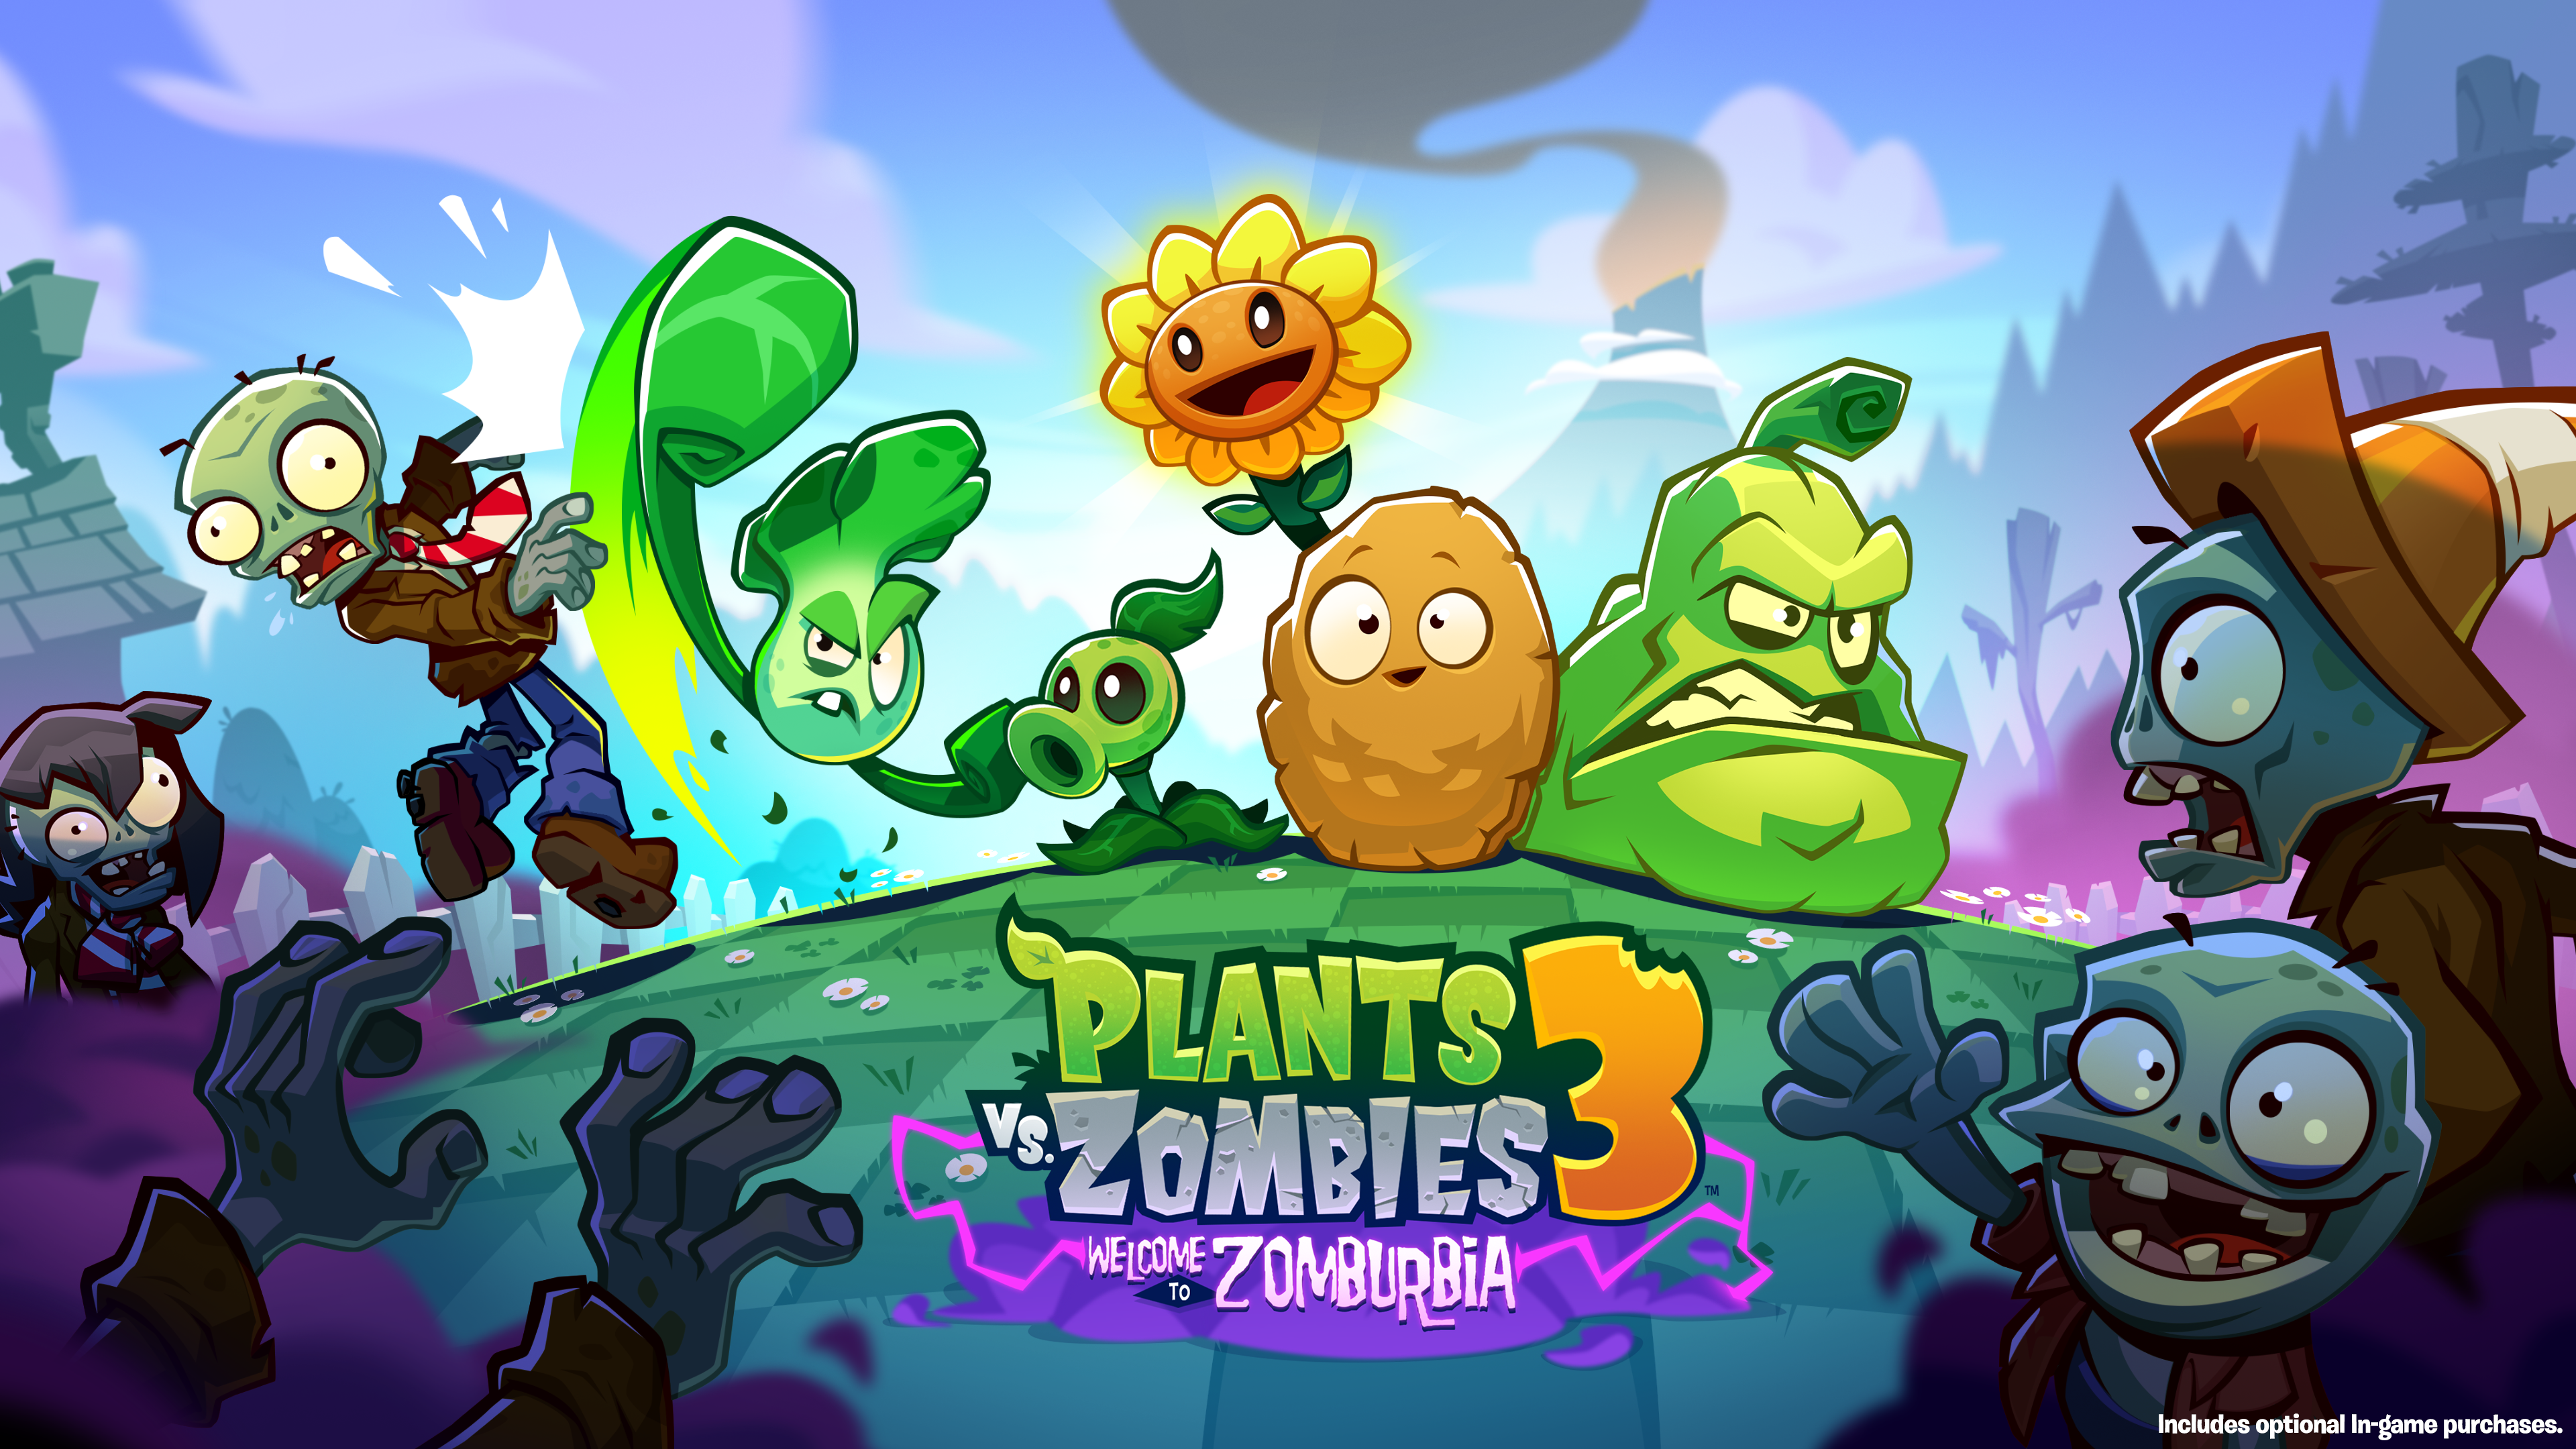 Plants Vs Zombies 3: Welcome To Zomburbia Coming This Year - GameSpot